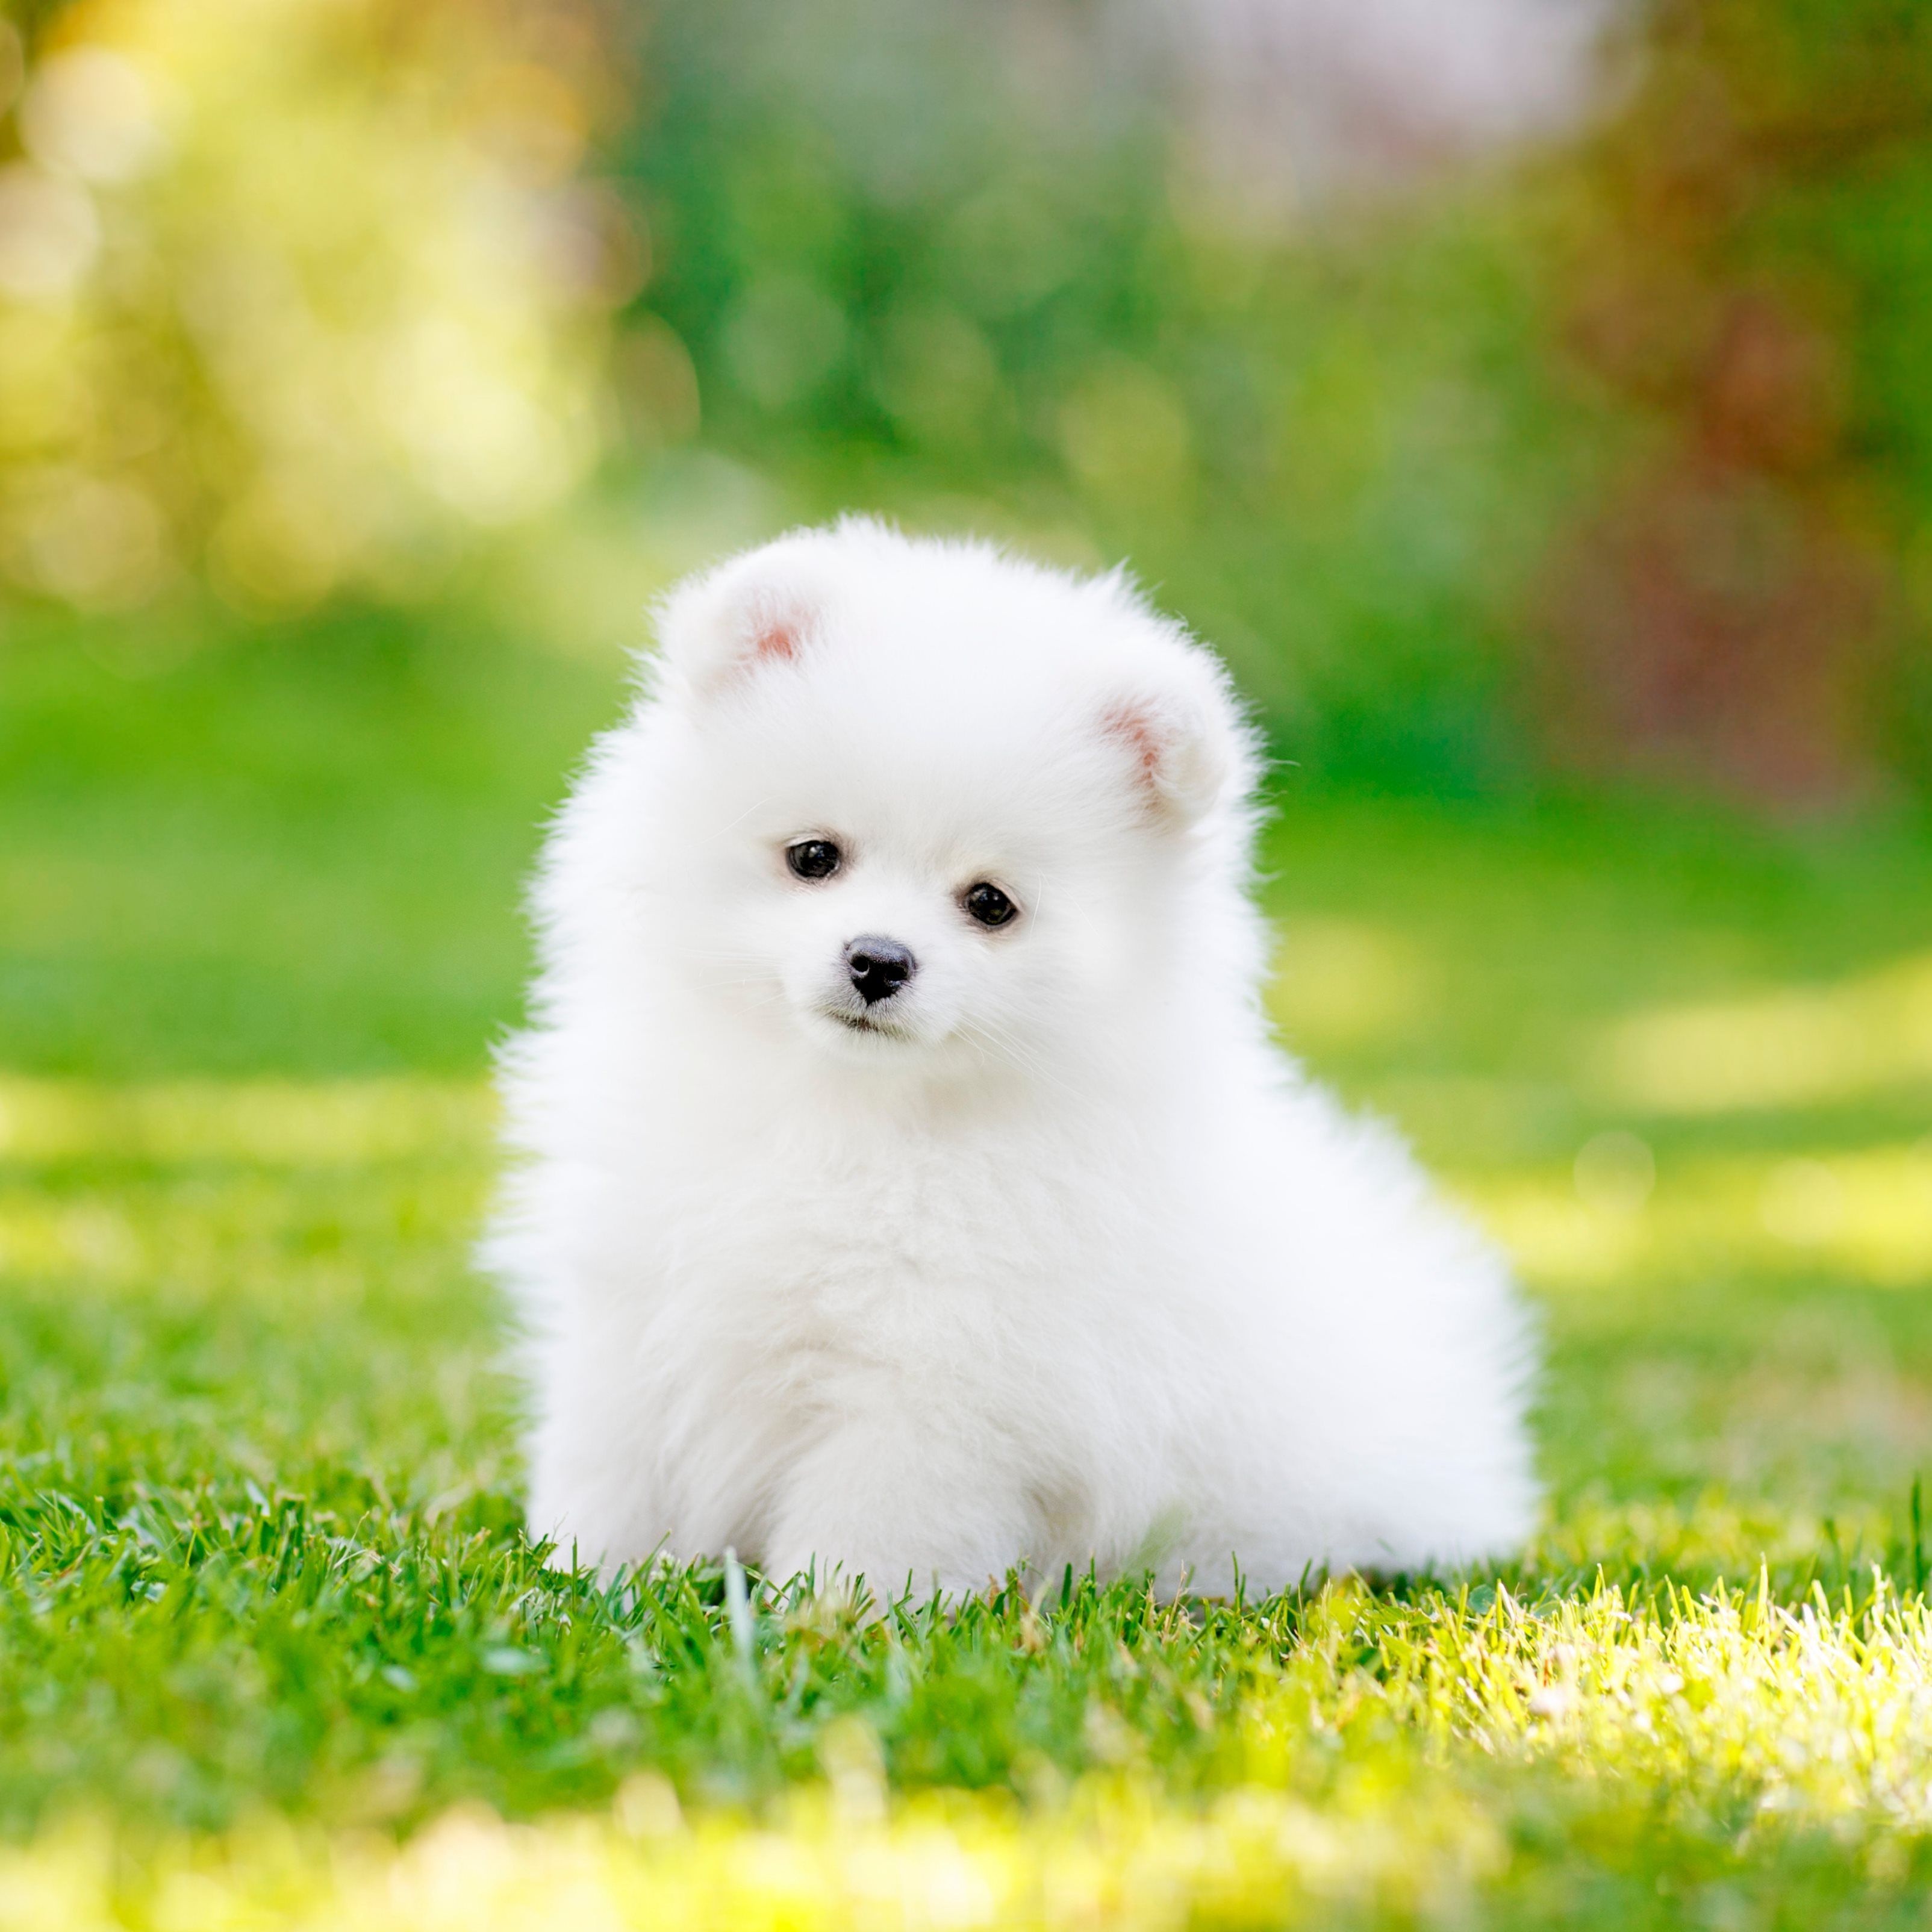 A white Pomeranian puppy sitting on the grass - Puppy